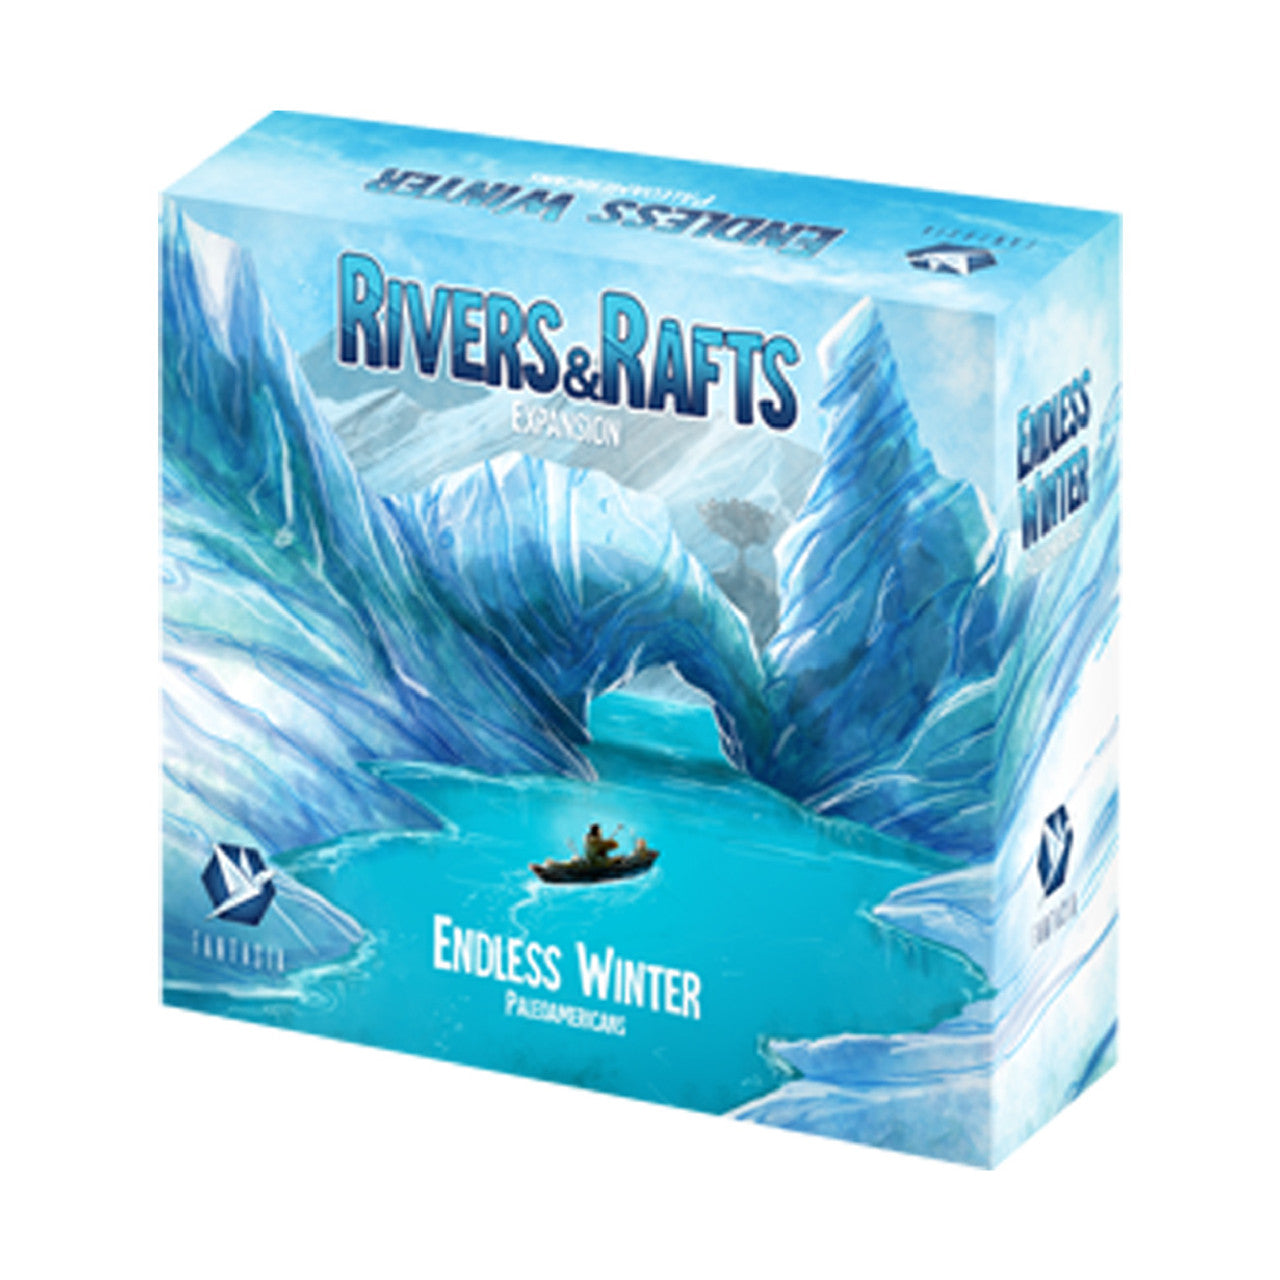 Endless Winter Paleoamericans Rivers and Rafts Expansion | Gate City Games LLC